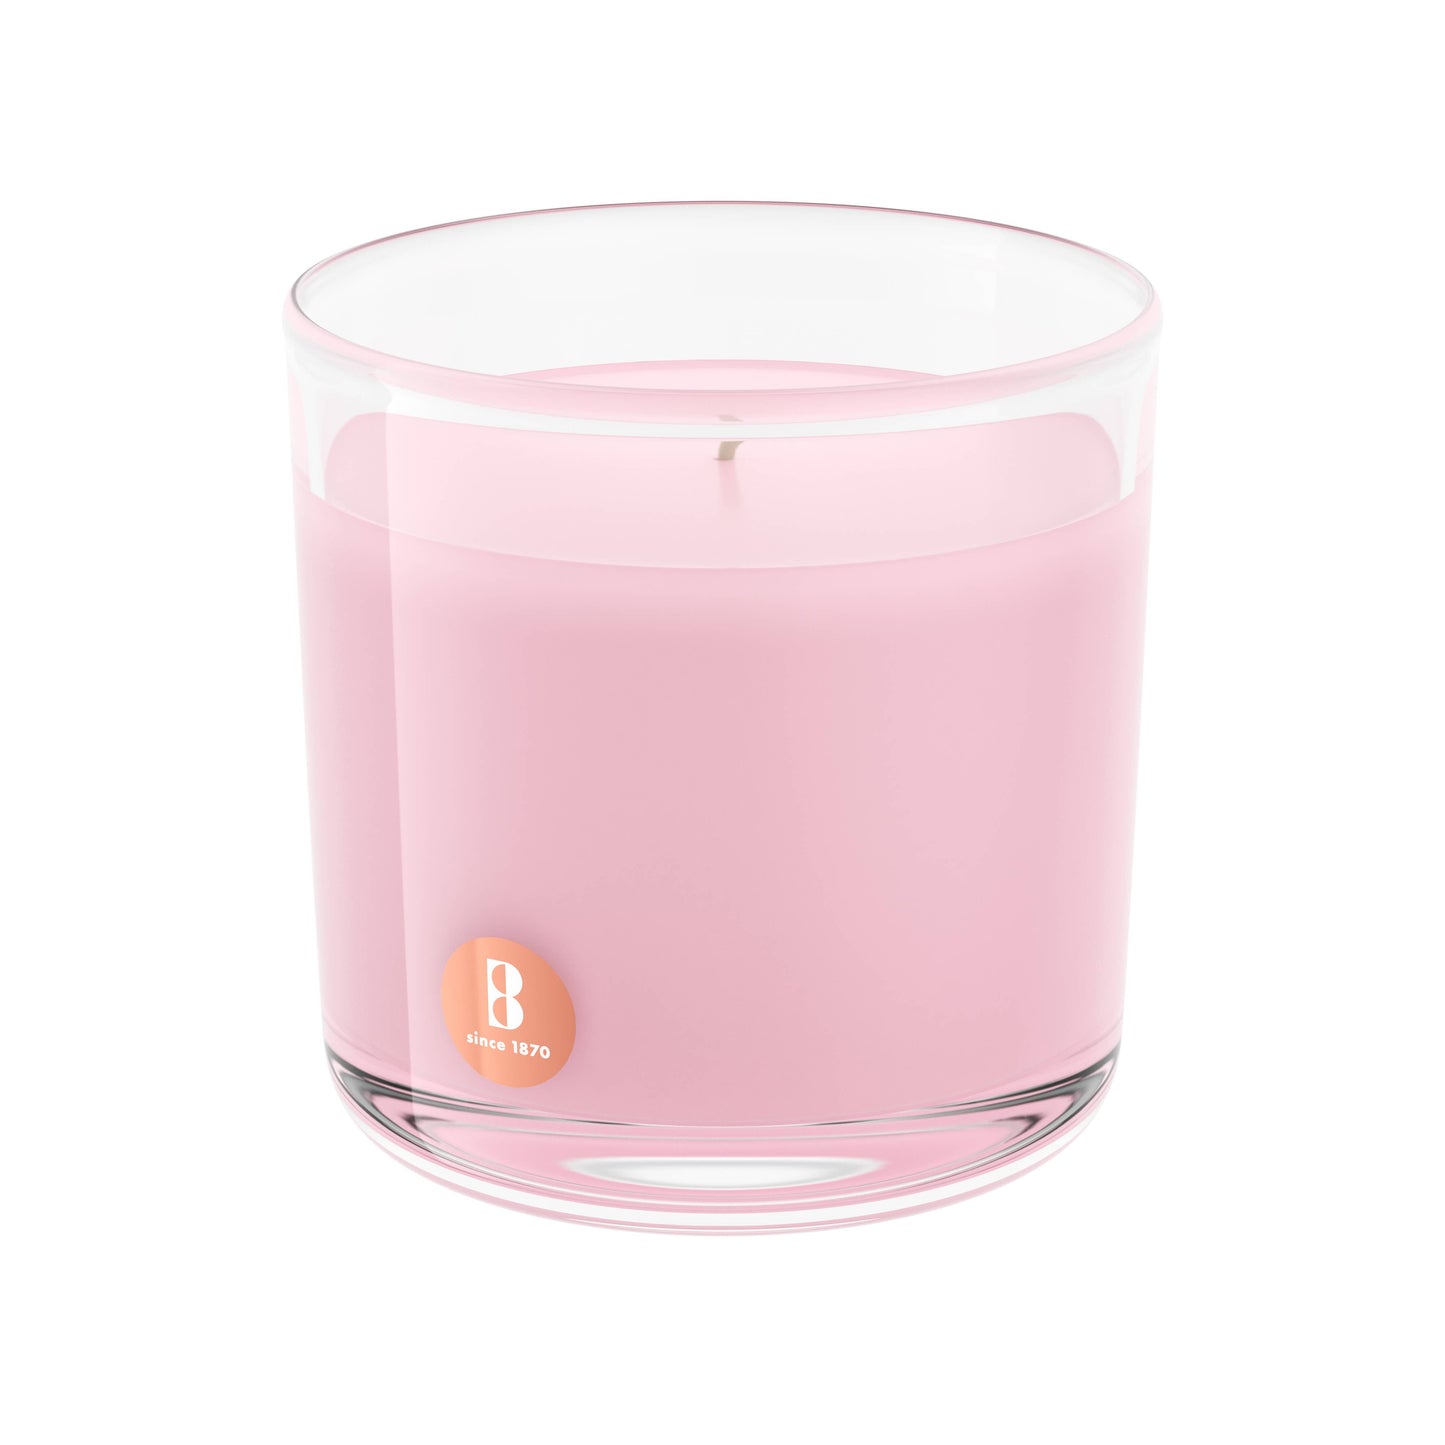 Magnolia Scented Candle - 3.75 x 3.75 Inches - 43